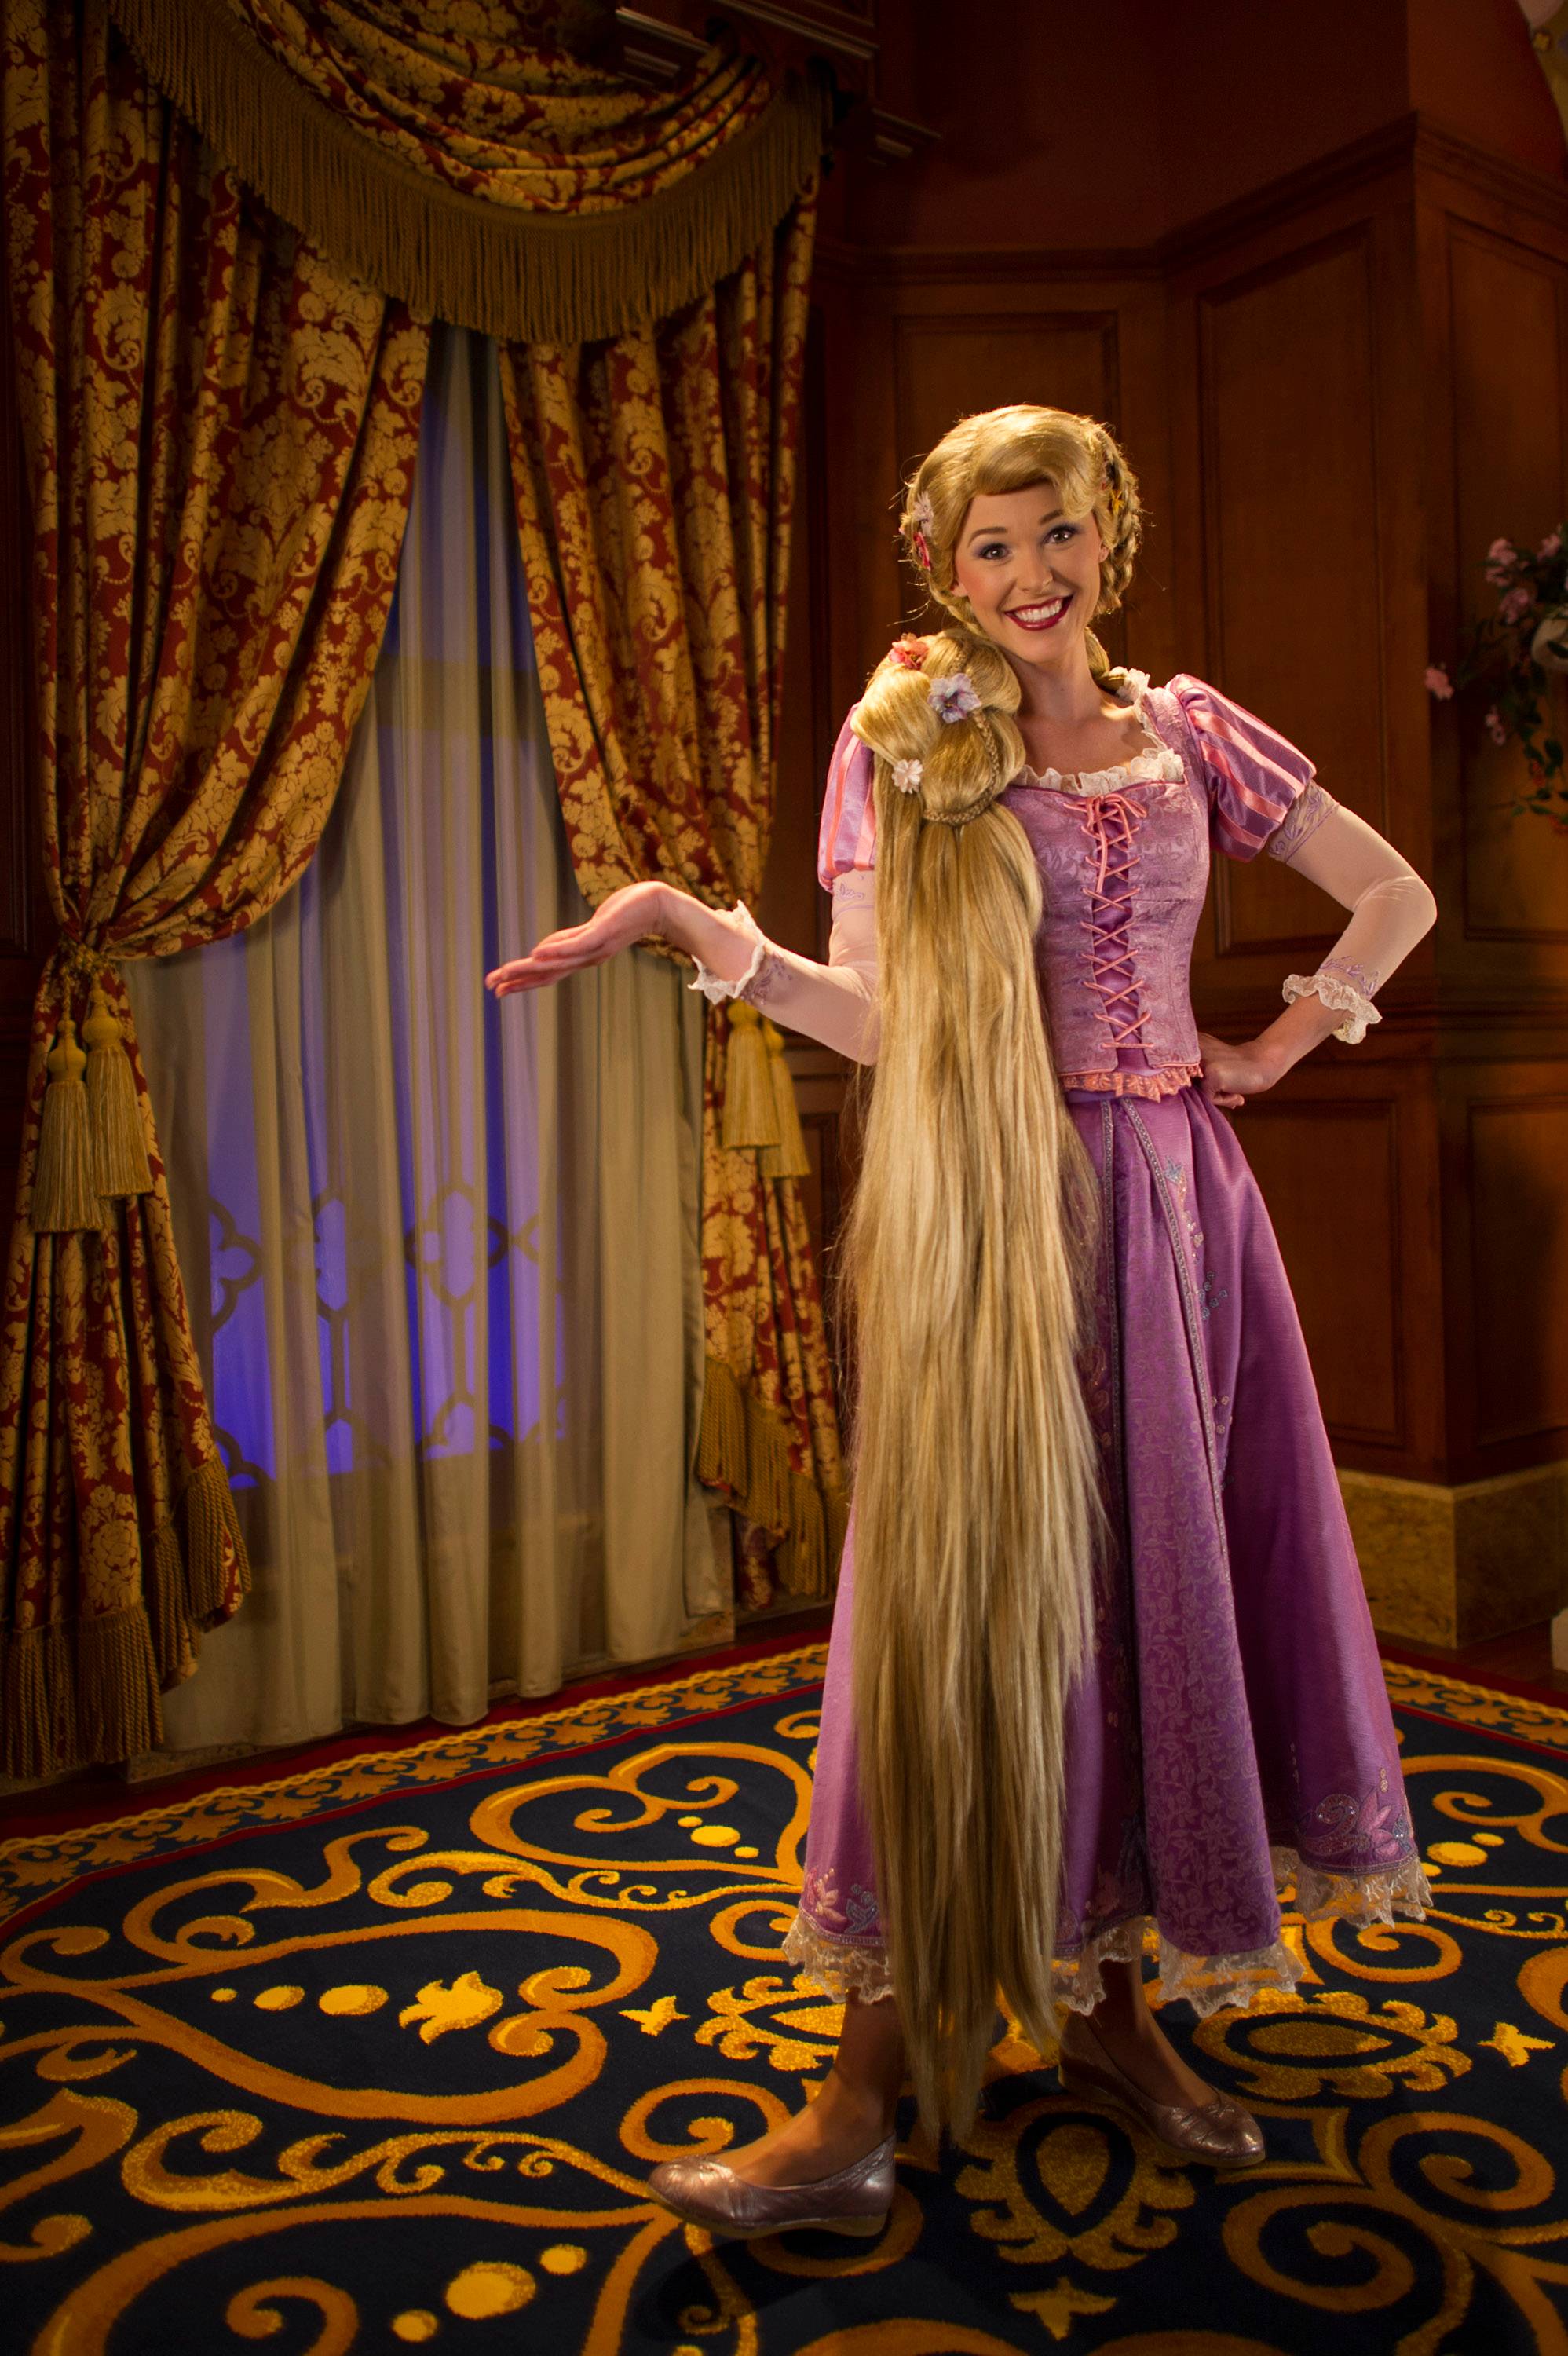 New Princess Fairytale Hall meet and greet now open at the Magic Kingdom